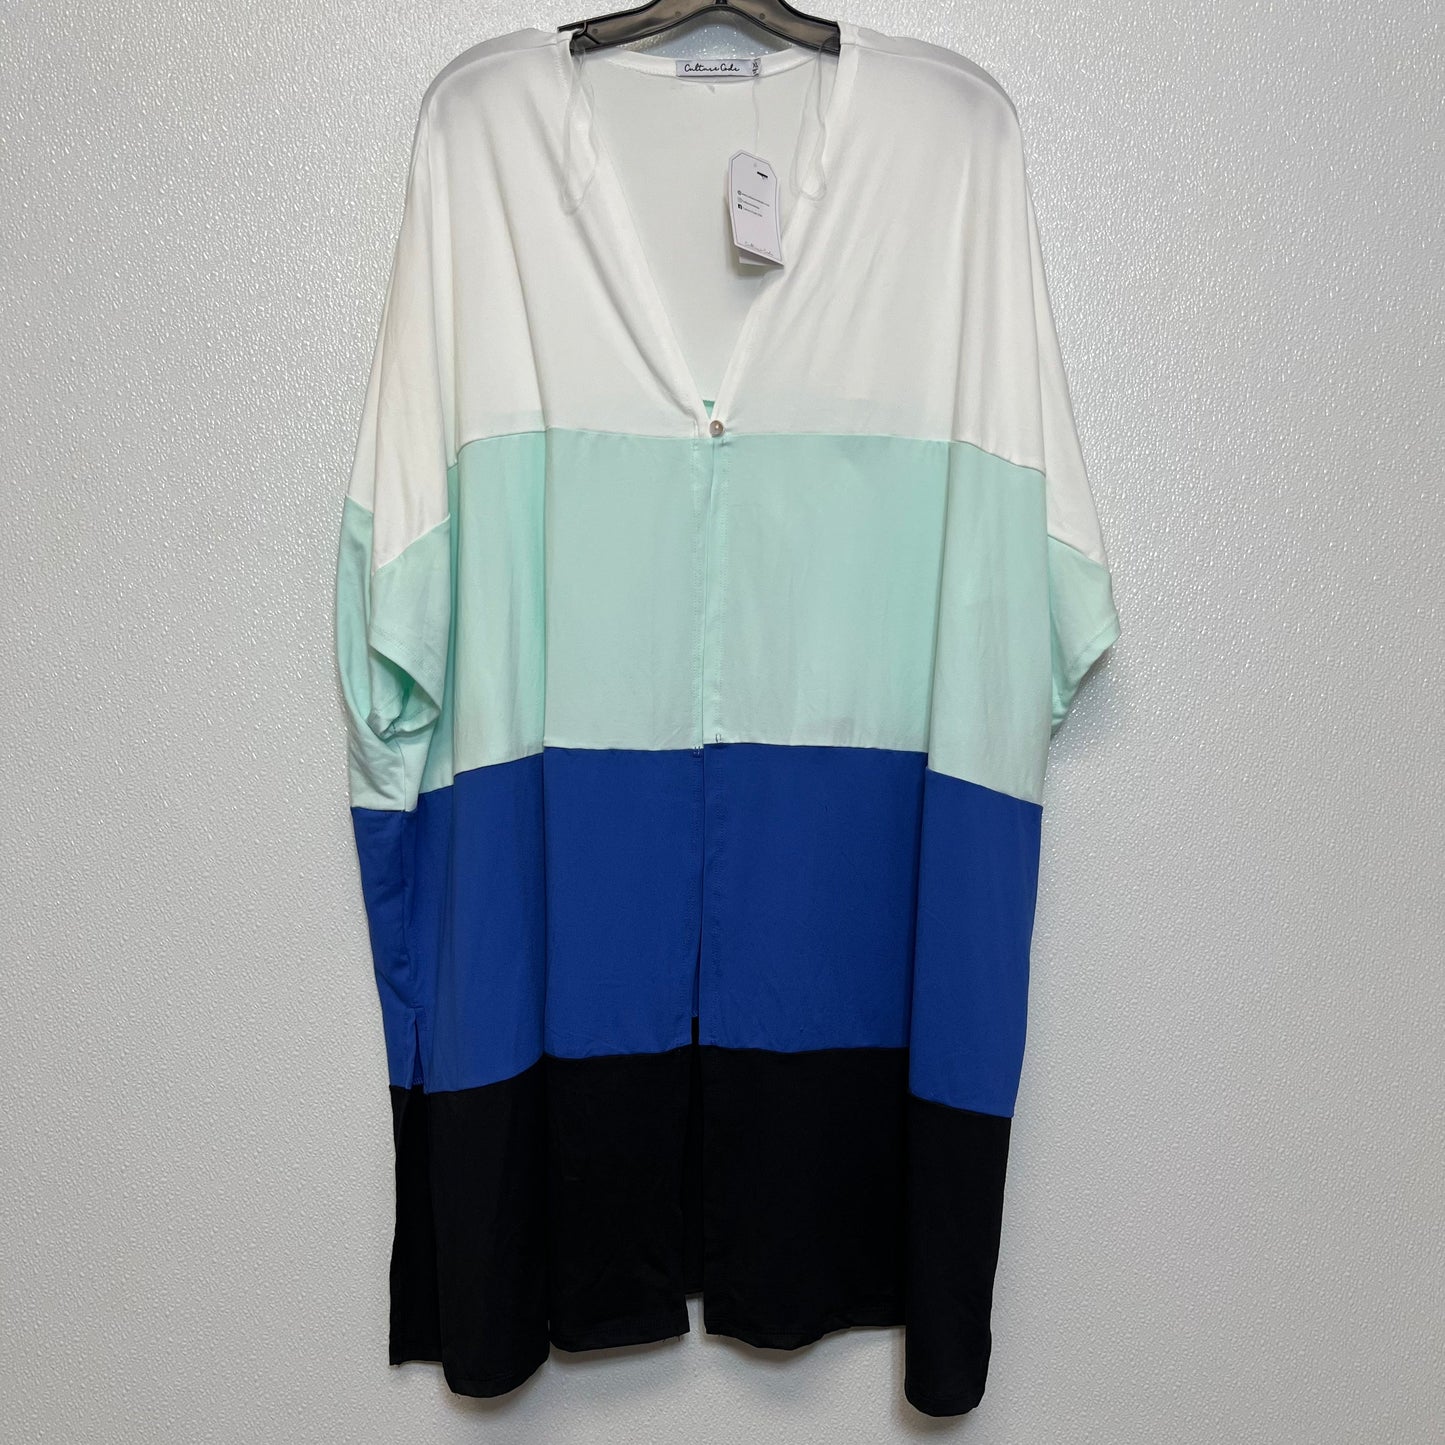 Cardigan By Clothes Mentor  Size: Xl